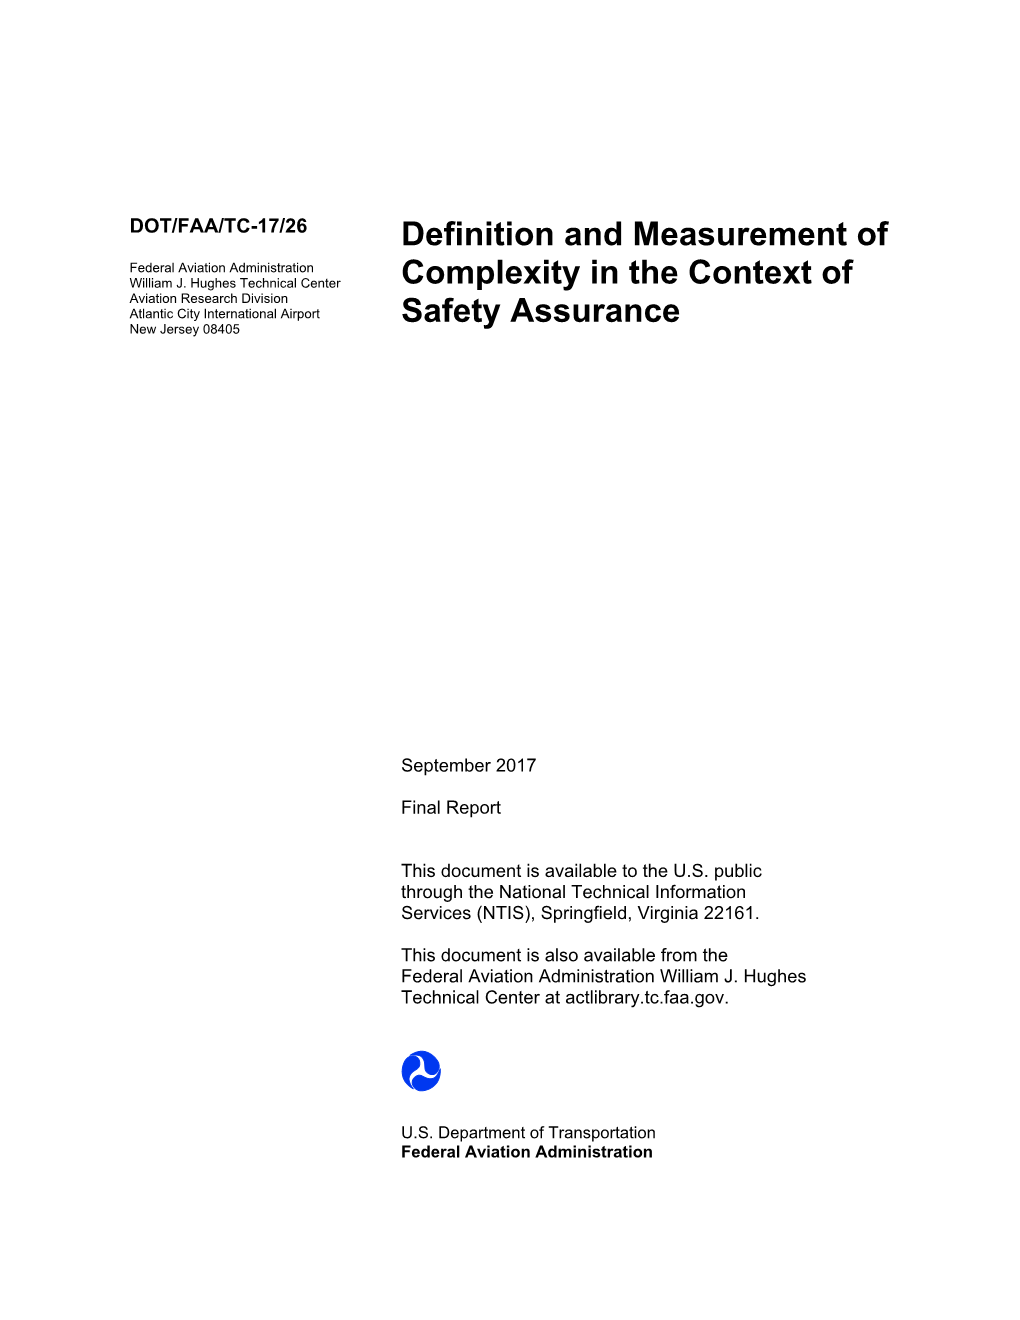 Definition and Measurement of Complexity in the Context of Safety